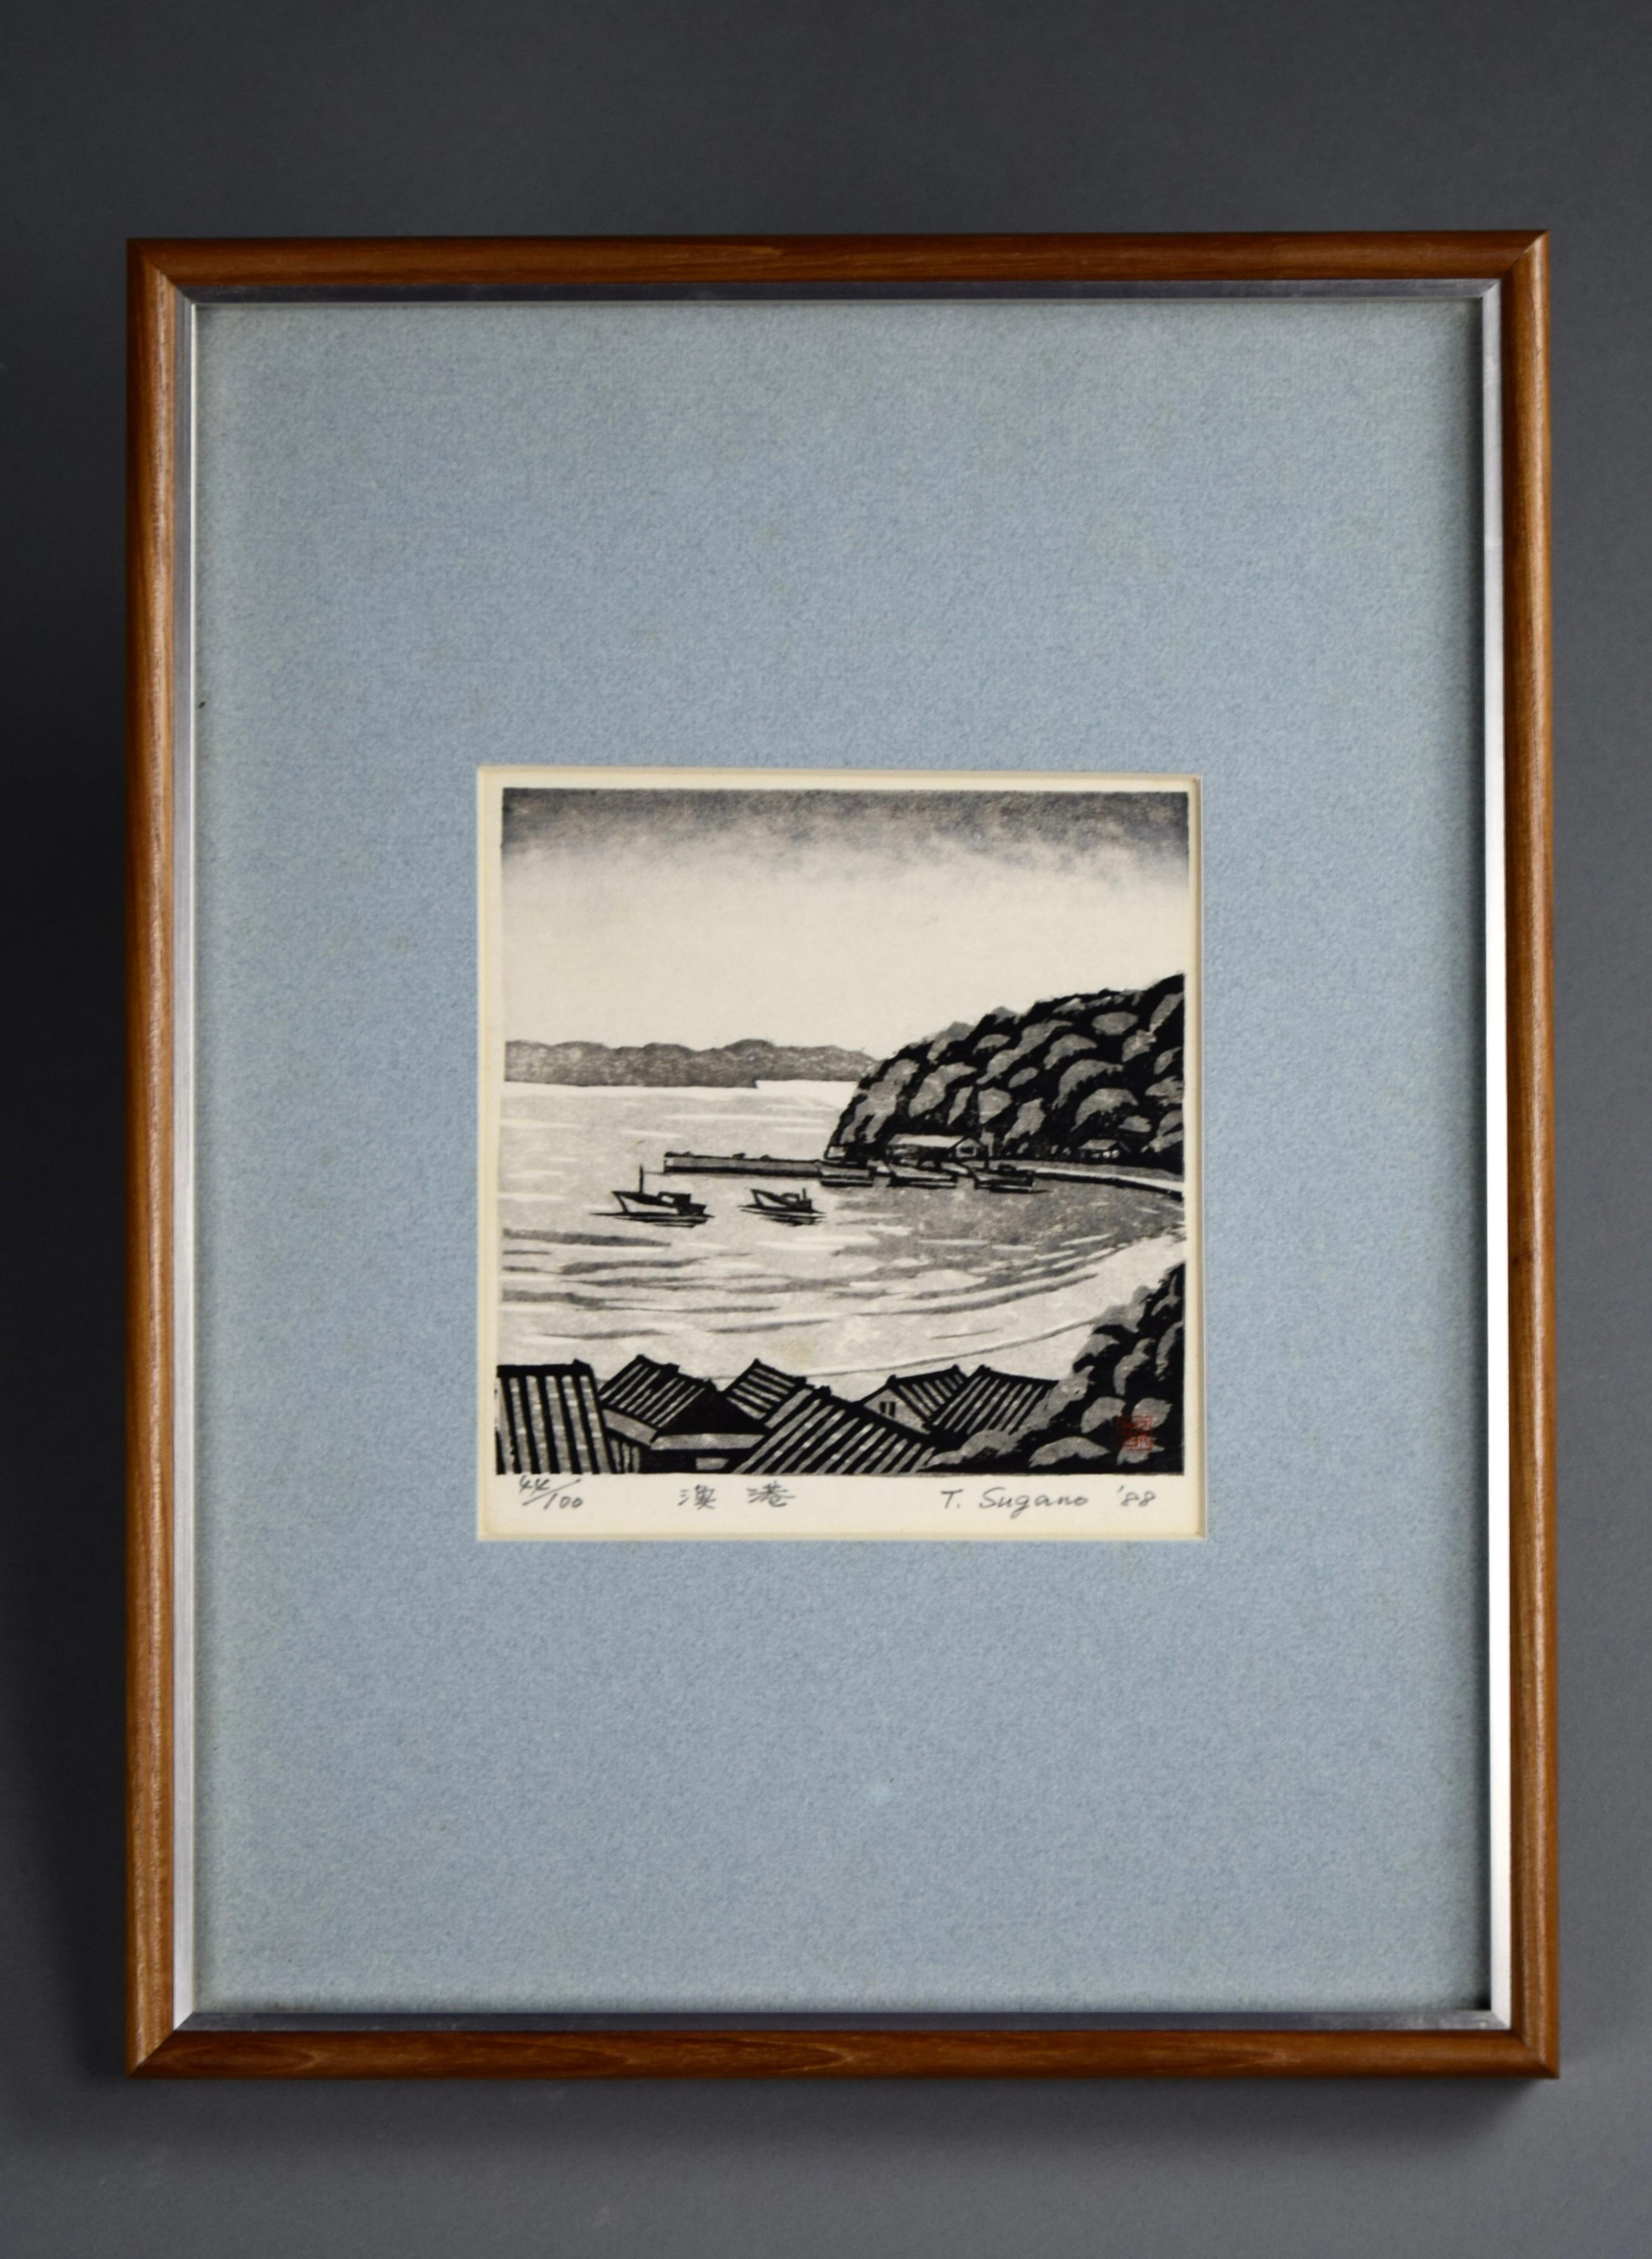 Glass Traditional Japanese Woodblock Print featuring the Fishing Village Ine For Sale